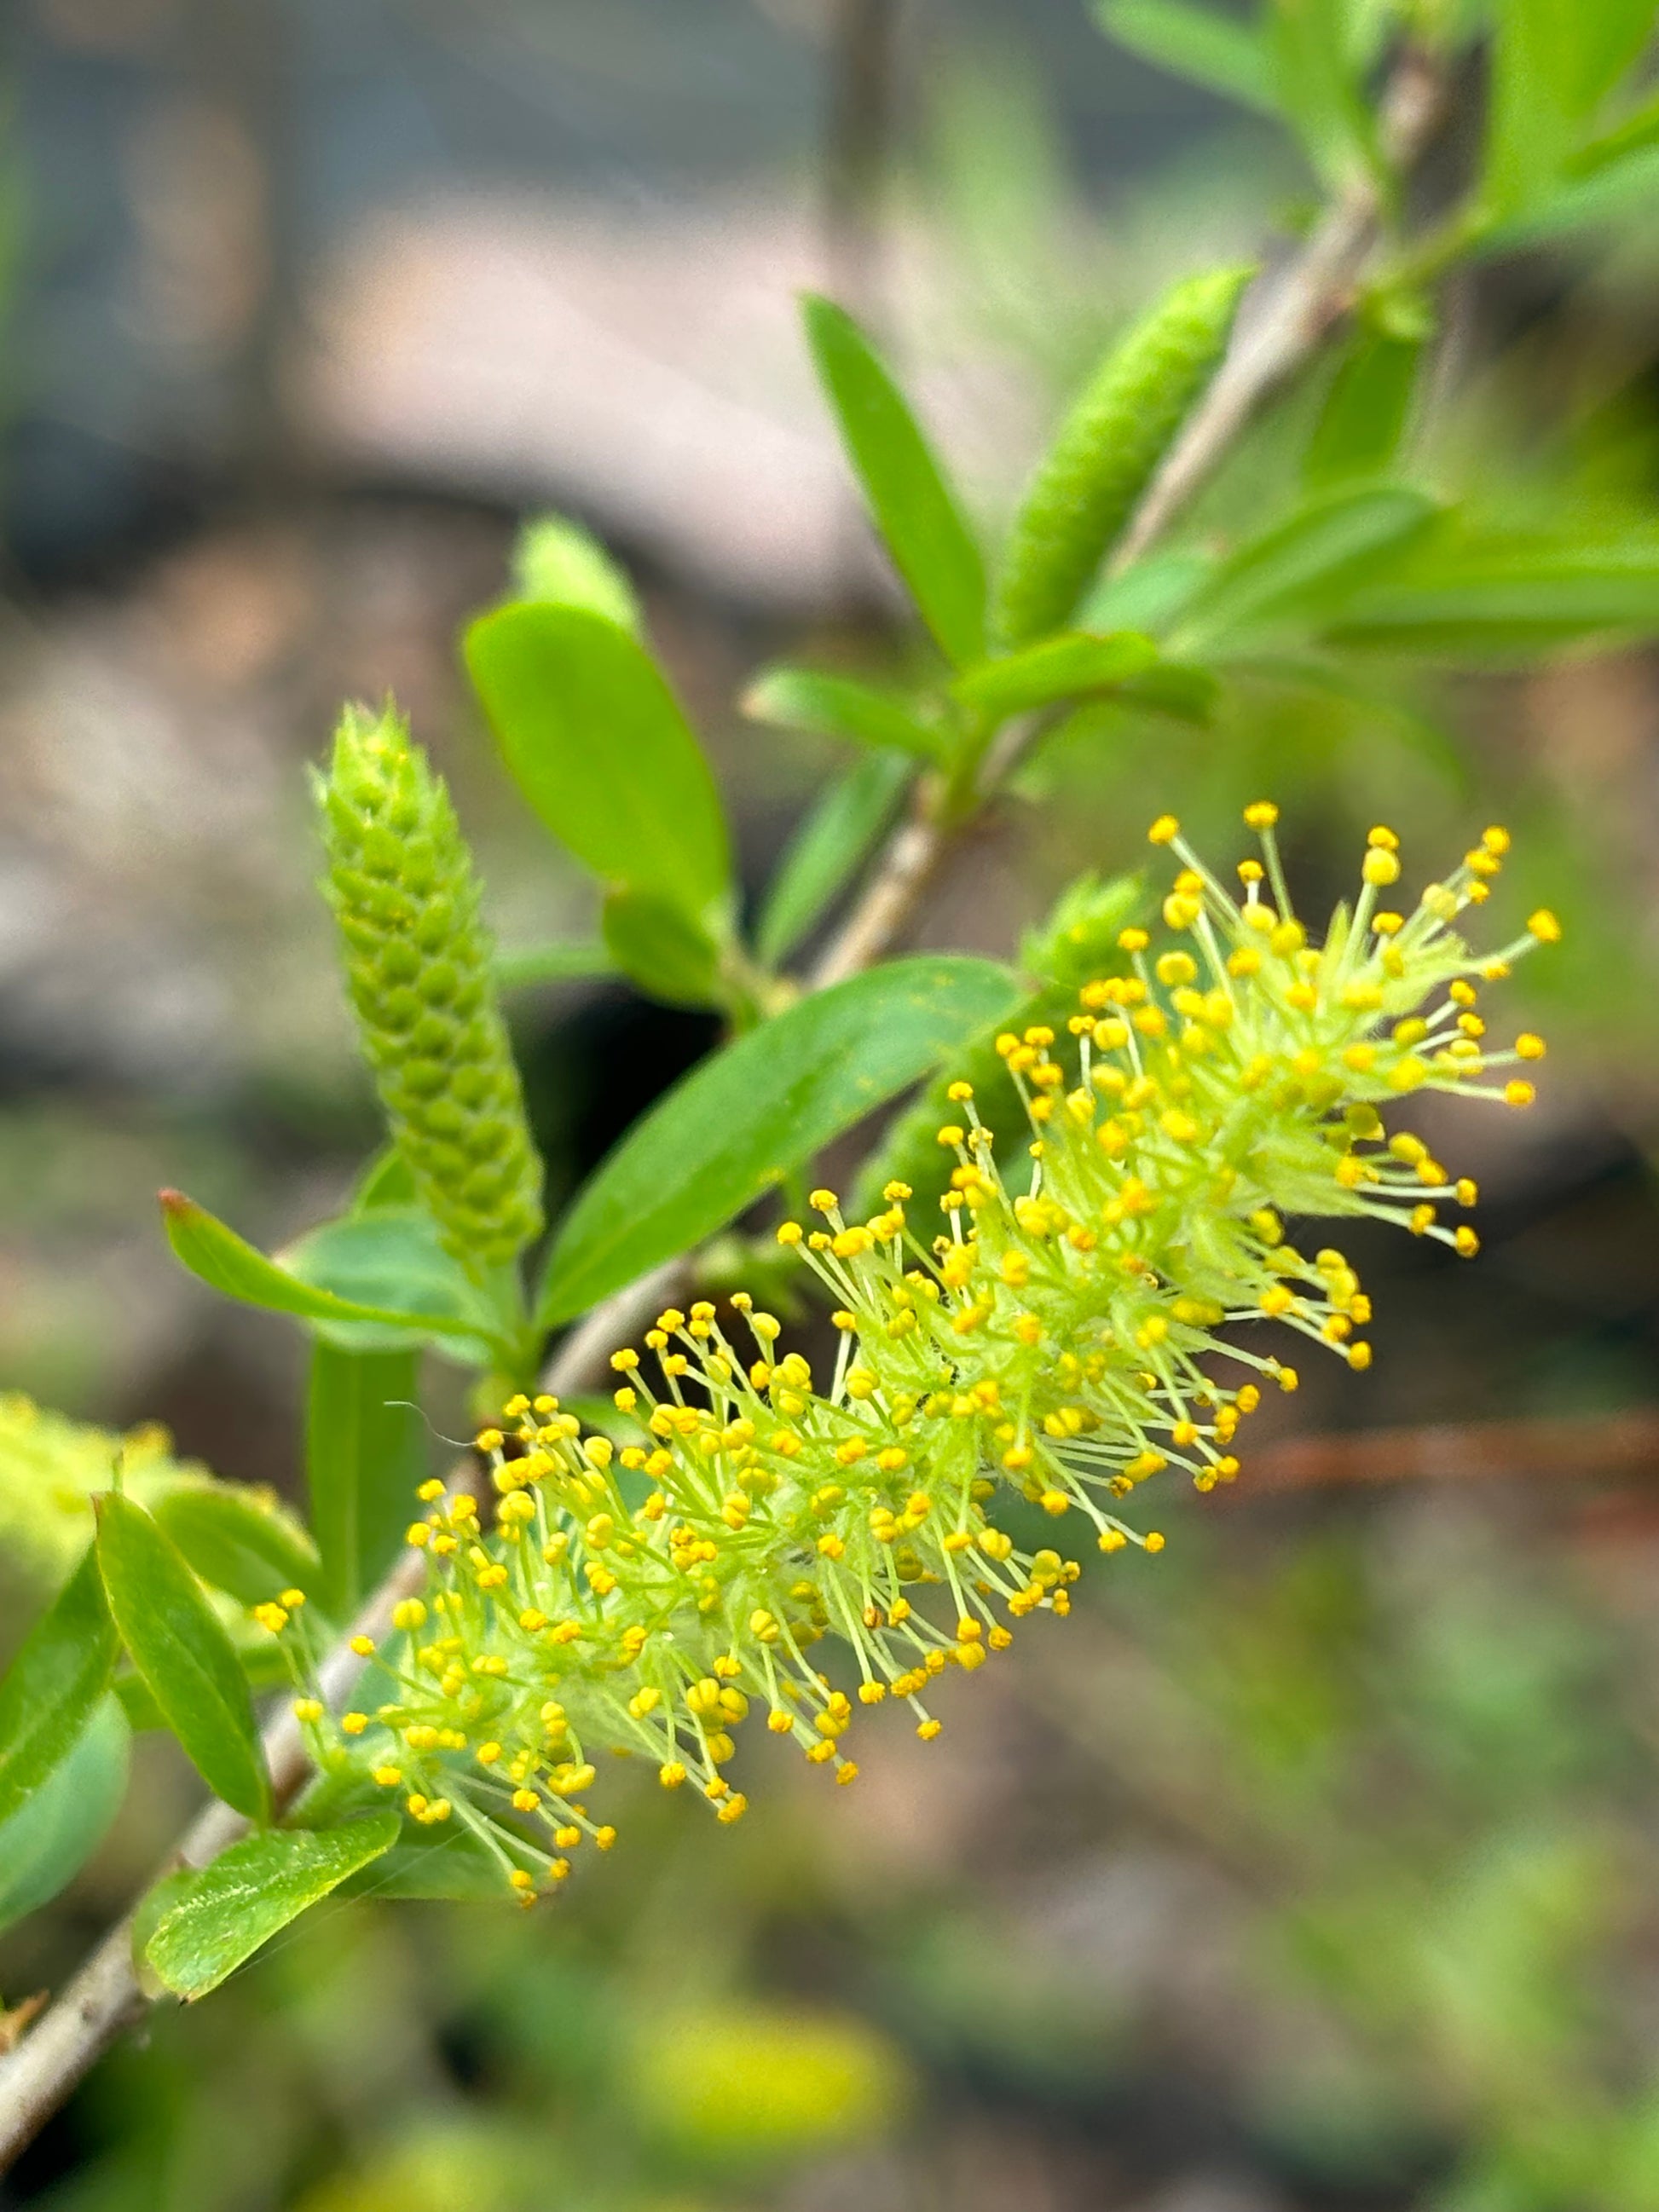 black willow flower is uses as a host plant for viceroy butterfly